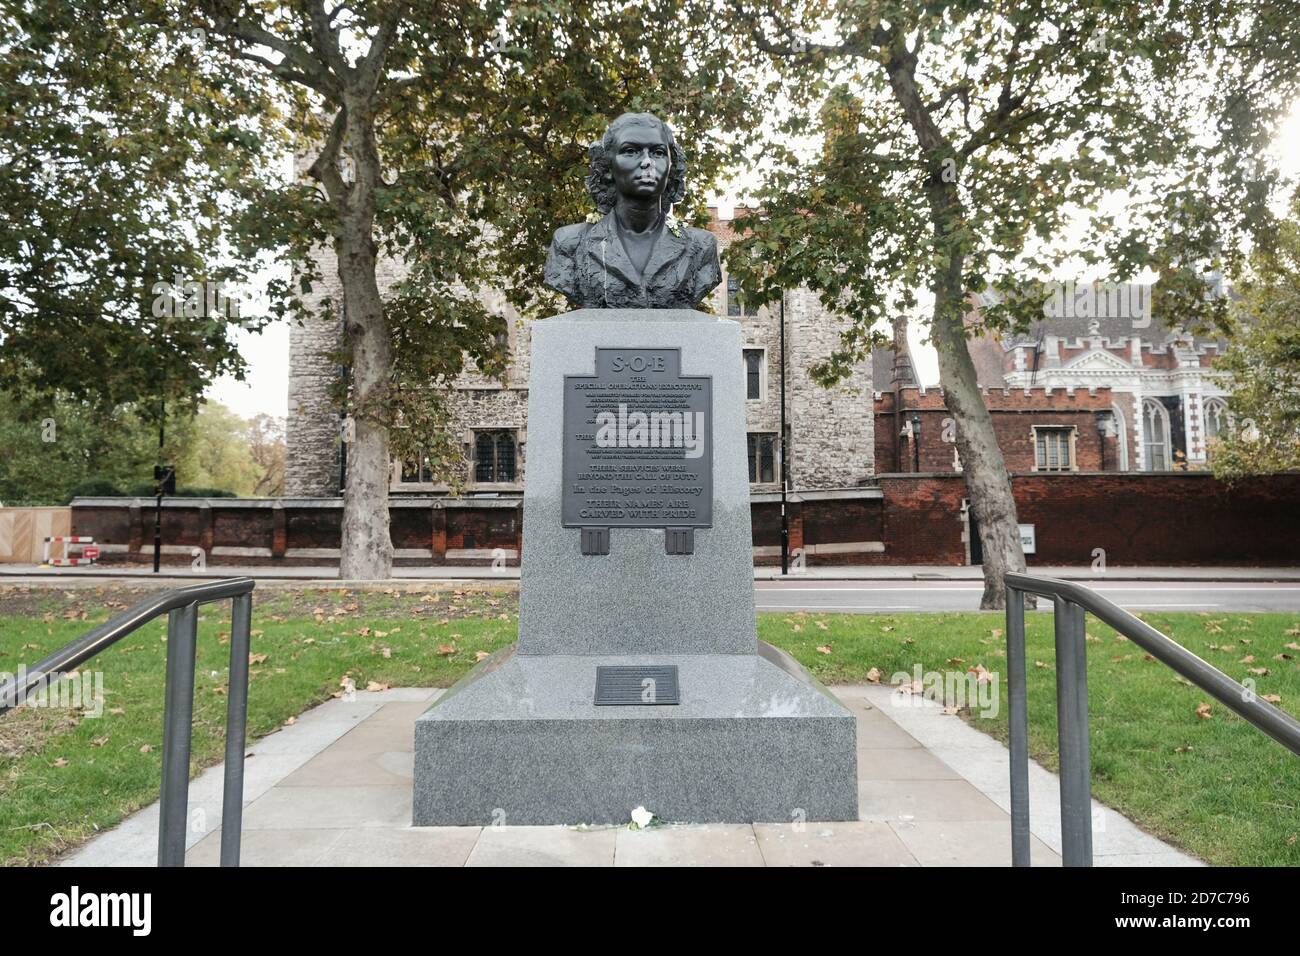 The Special Operations Executive (SOE) memorial in London.  It honours agents who operated behind enemy lines during WWII. Stock Photo